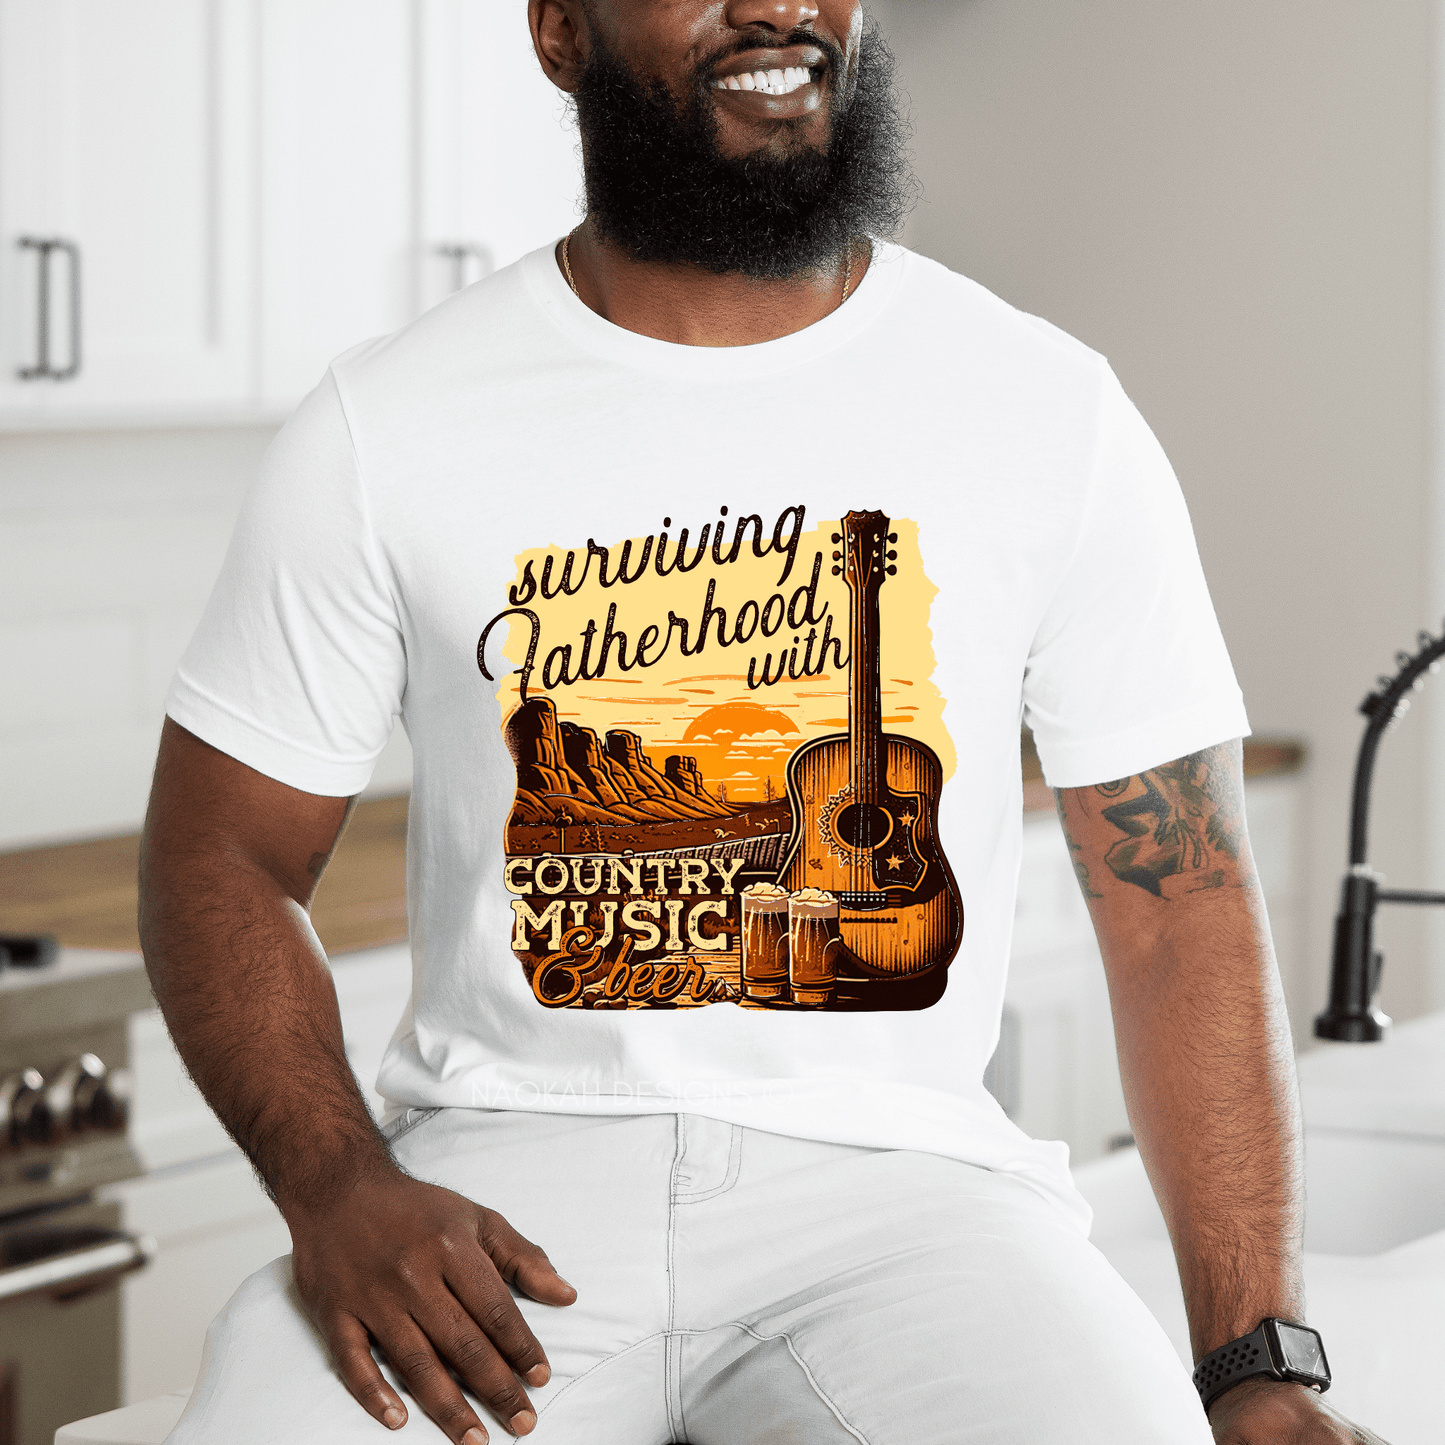 surviving fatherhood with country music and beer shirt, best dad ever shirt, fathers day gift shirt, fathers day gift, new dad shirt, father's day shirt, best dad t-shirt, best dad gift, dad shirt, country fan dad shirt, fathers day country shirt, dad beer shirt